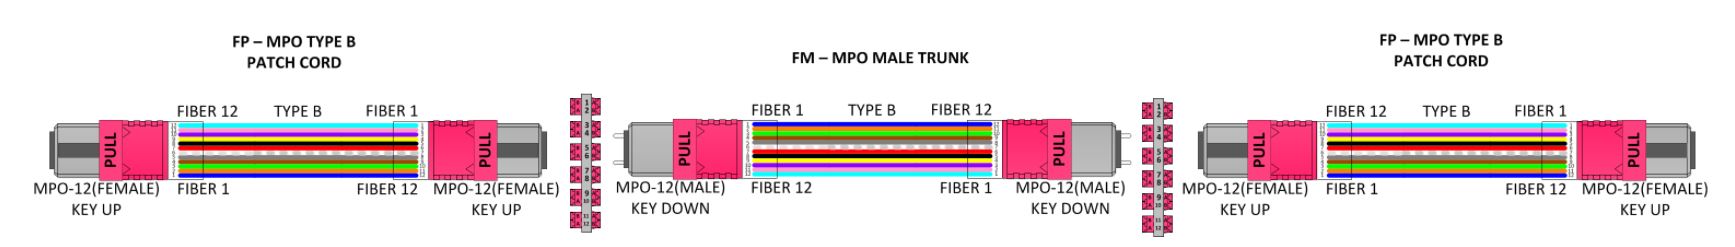 How-To-Rules-of-Fiber-Polarity-Example-4